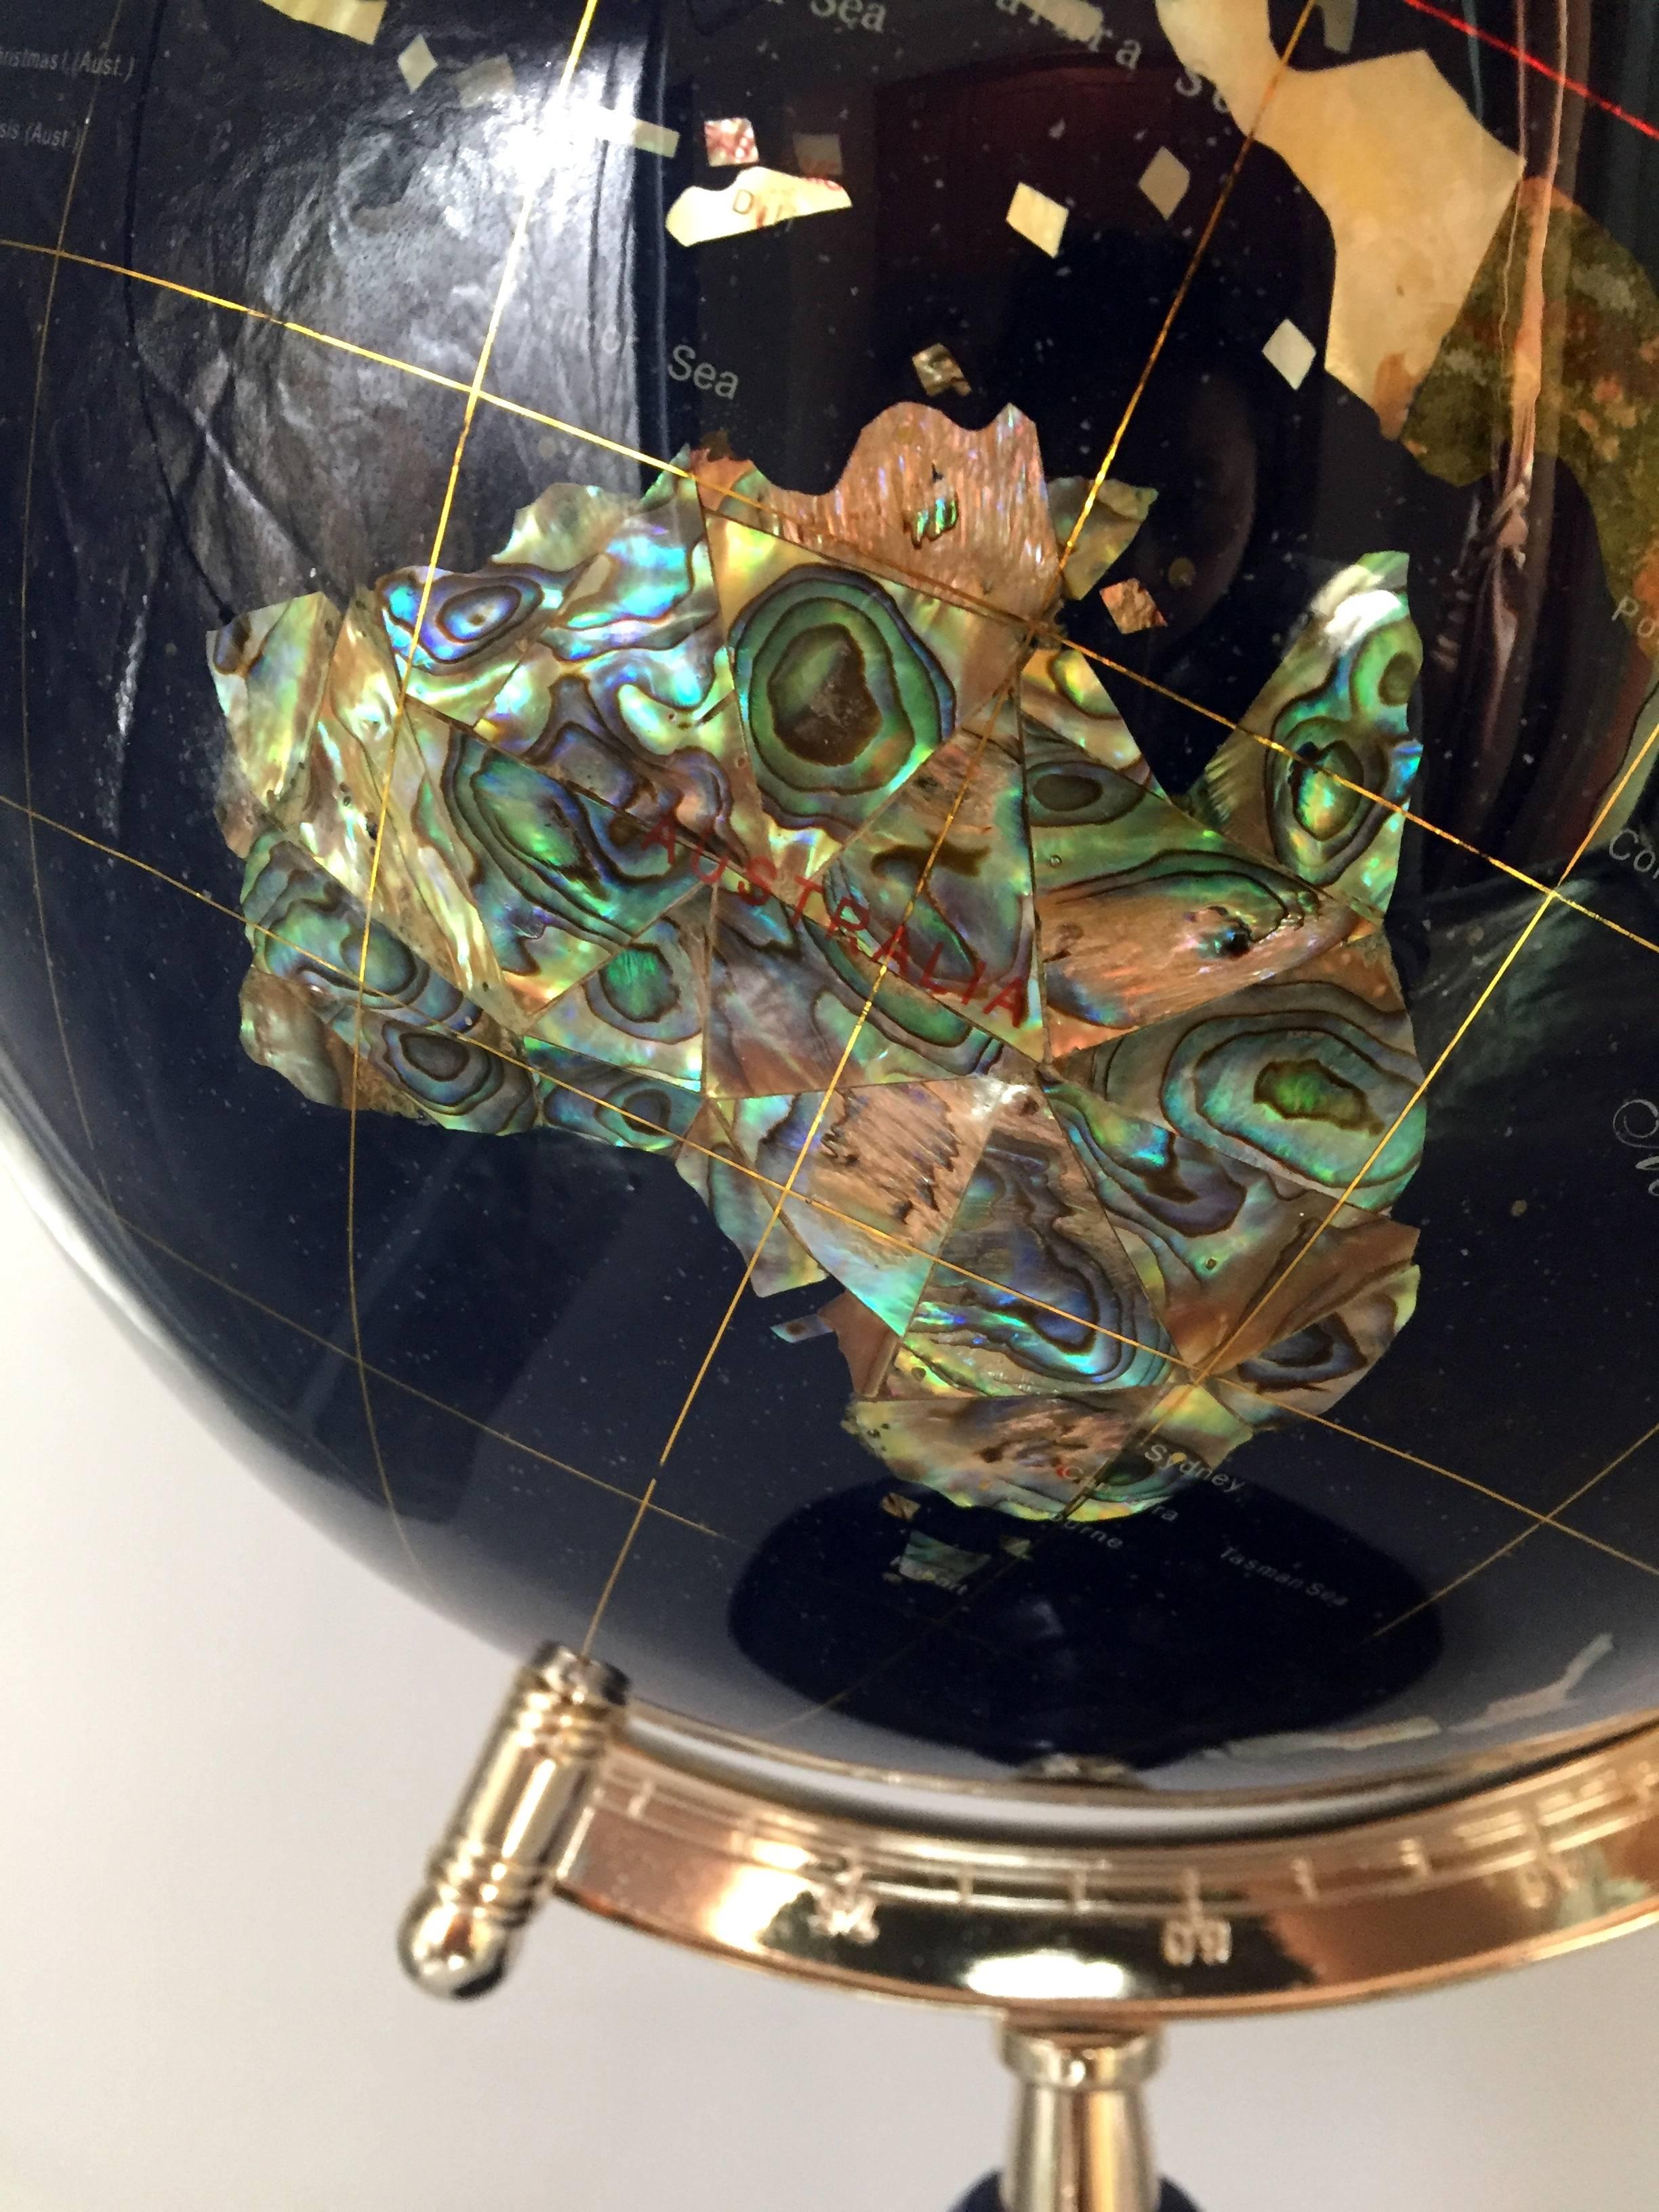 This spectacular globe is made with all genuine gem stones. The base is ground lapis, with jasper, mother-of-pearl, agate, sandstone and many other gem and minerals shaped into the shape of countries, hand fitted and polished to perfection. The